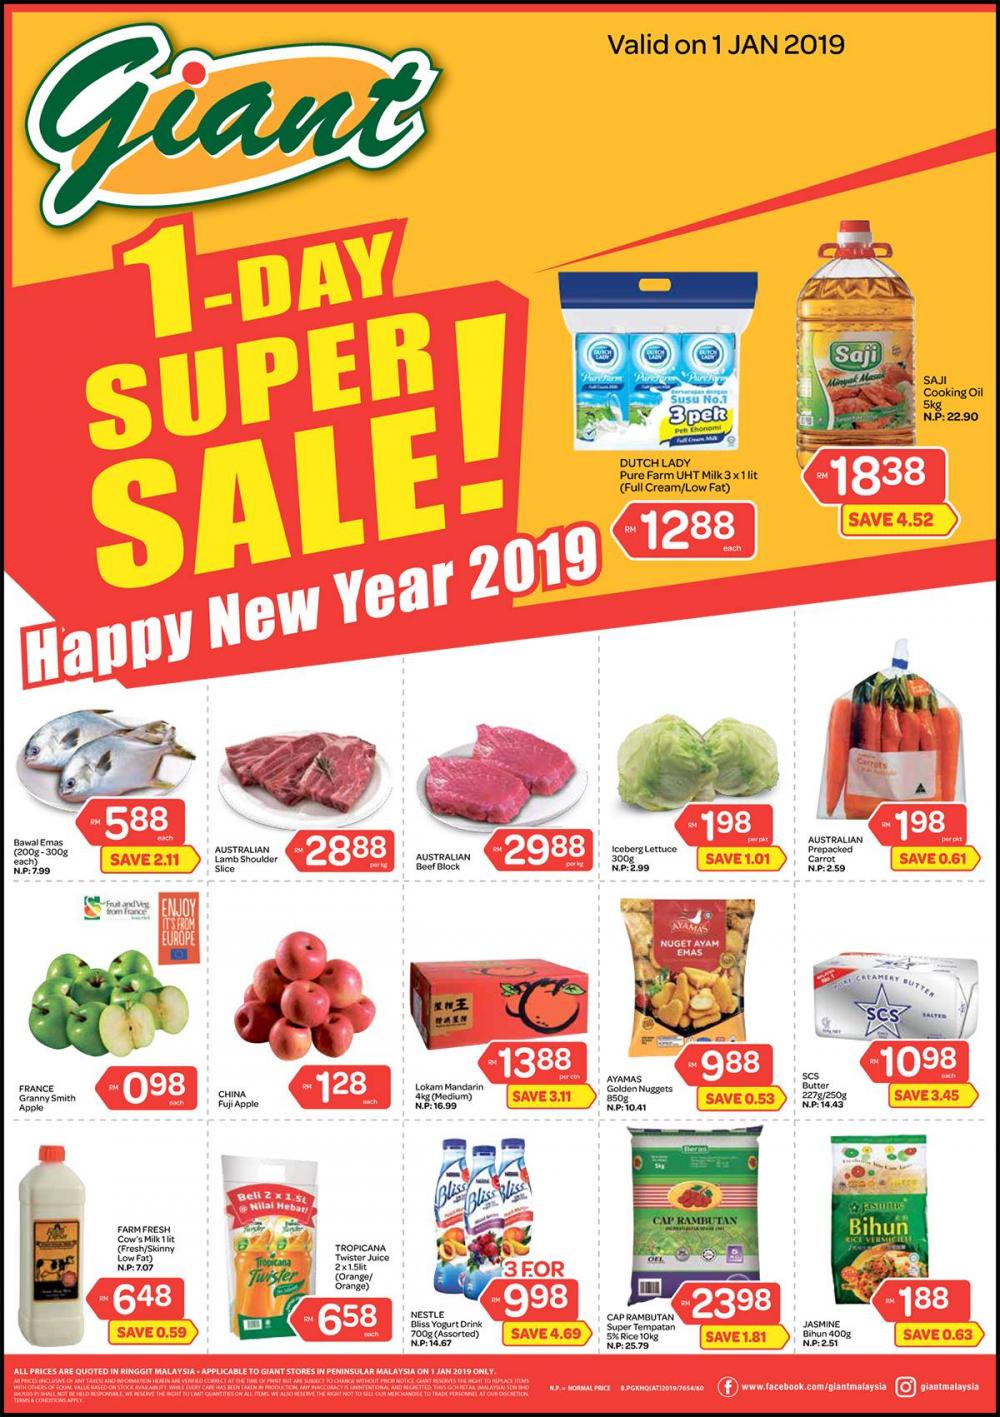 Giant New Year 1 Day Super Sale Promotion (1 January 2019)